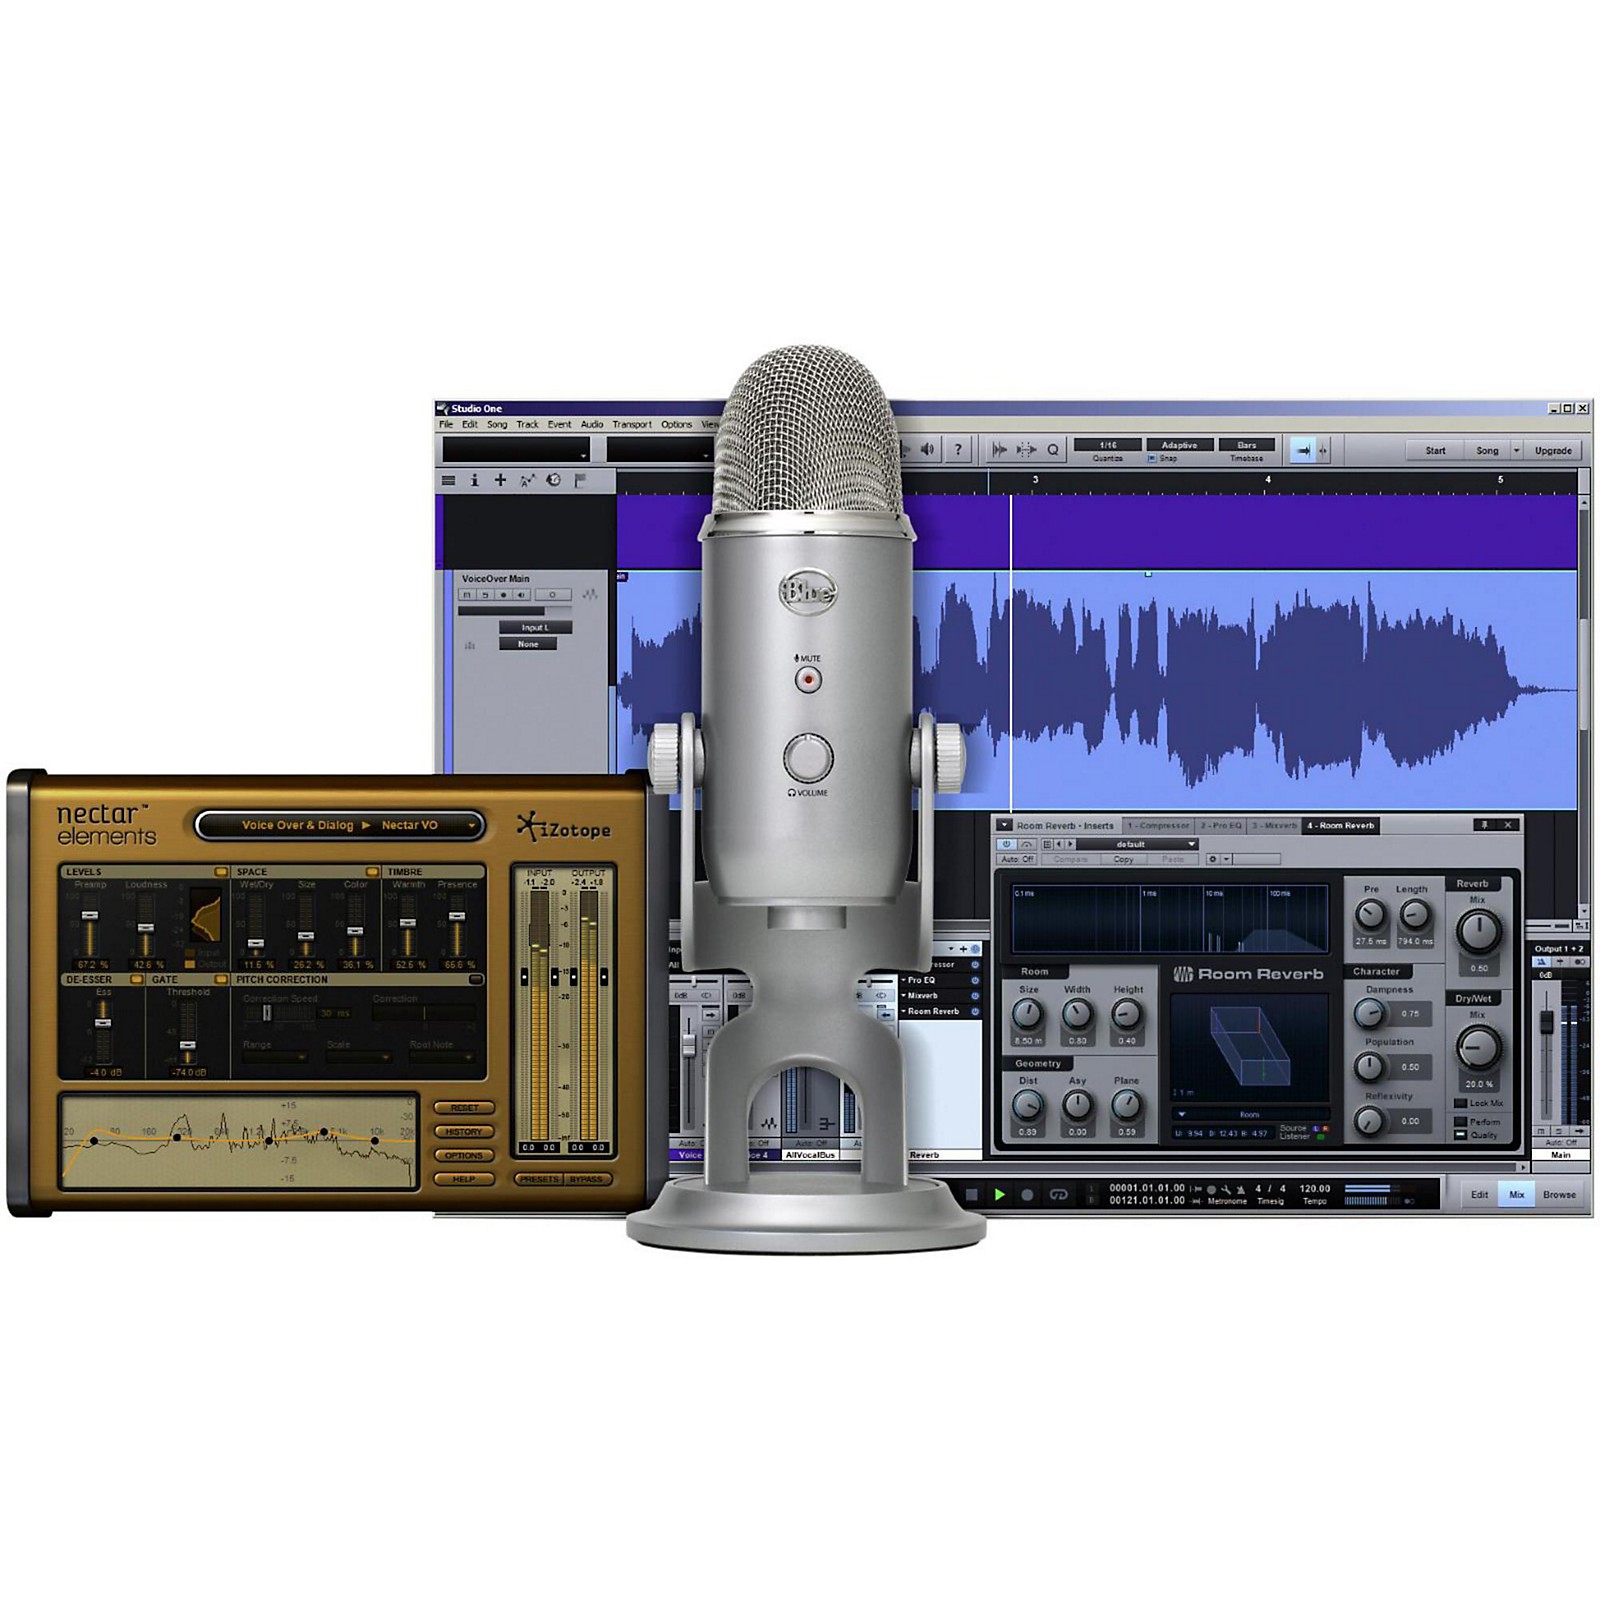 Blue Yeti Studio Usb Ios Microphone With 100 In Software Guitar Center